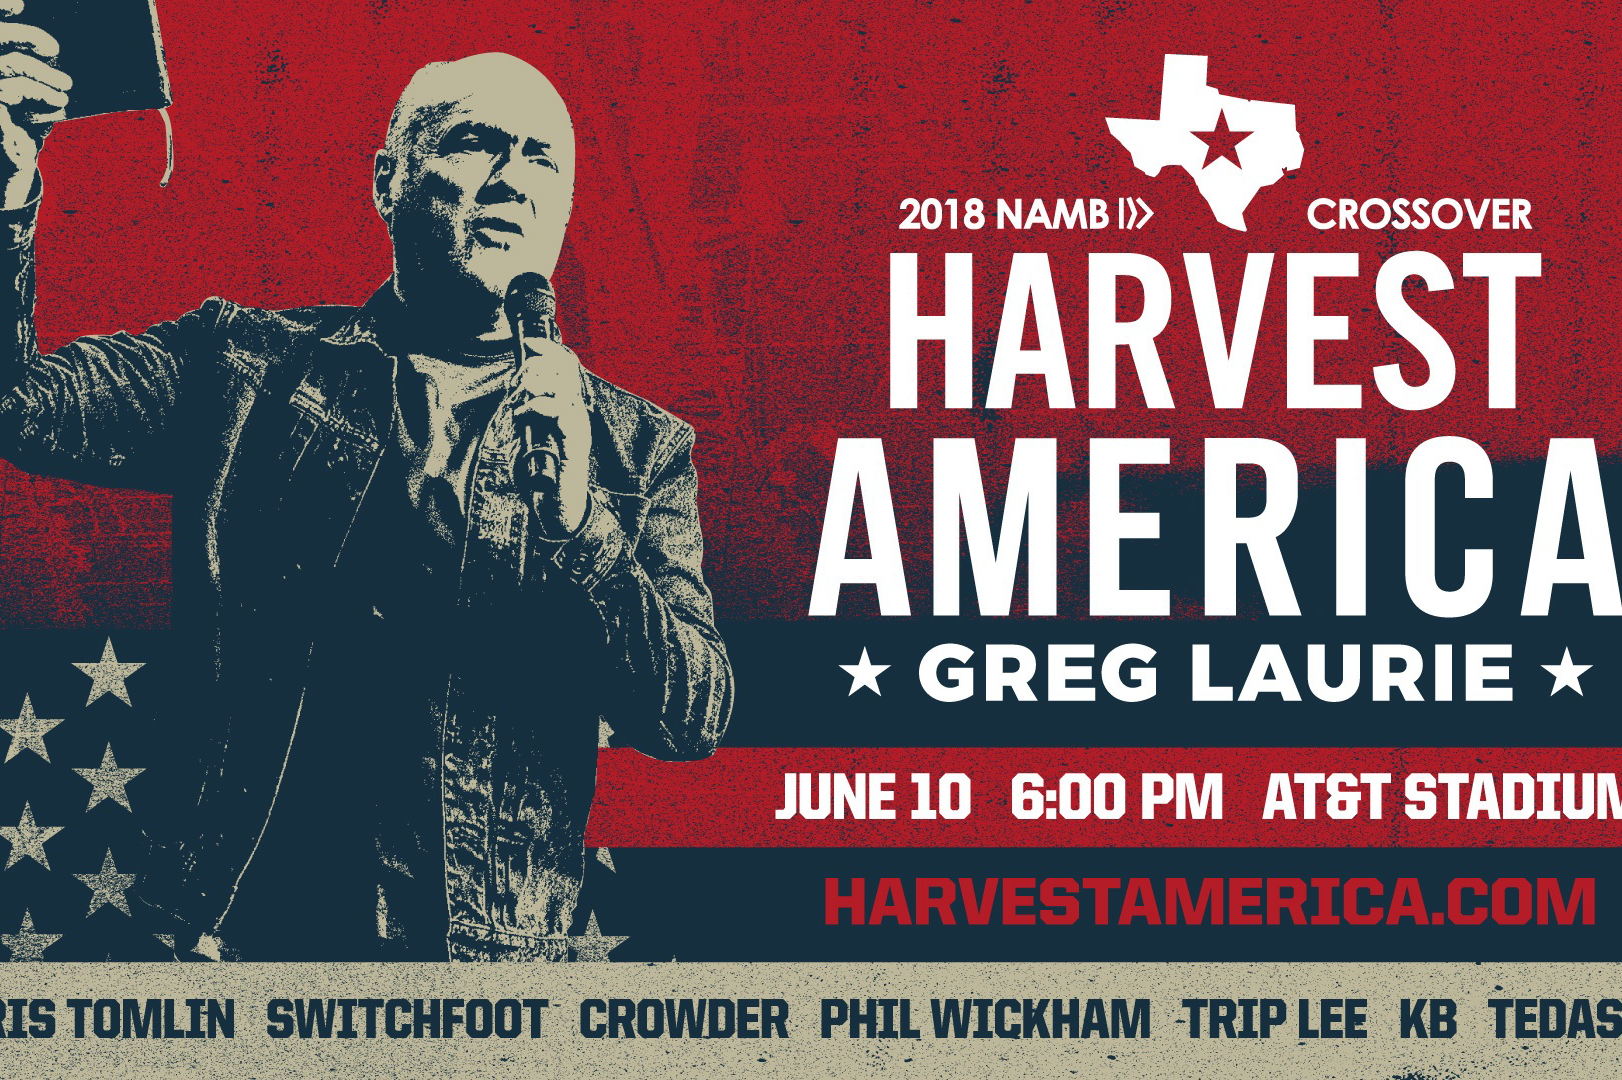 Local Churches to Attend Crossover Harvest America With Pastor Greg